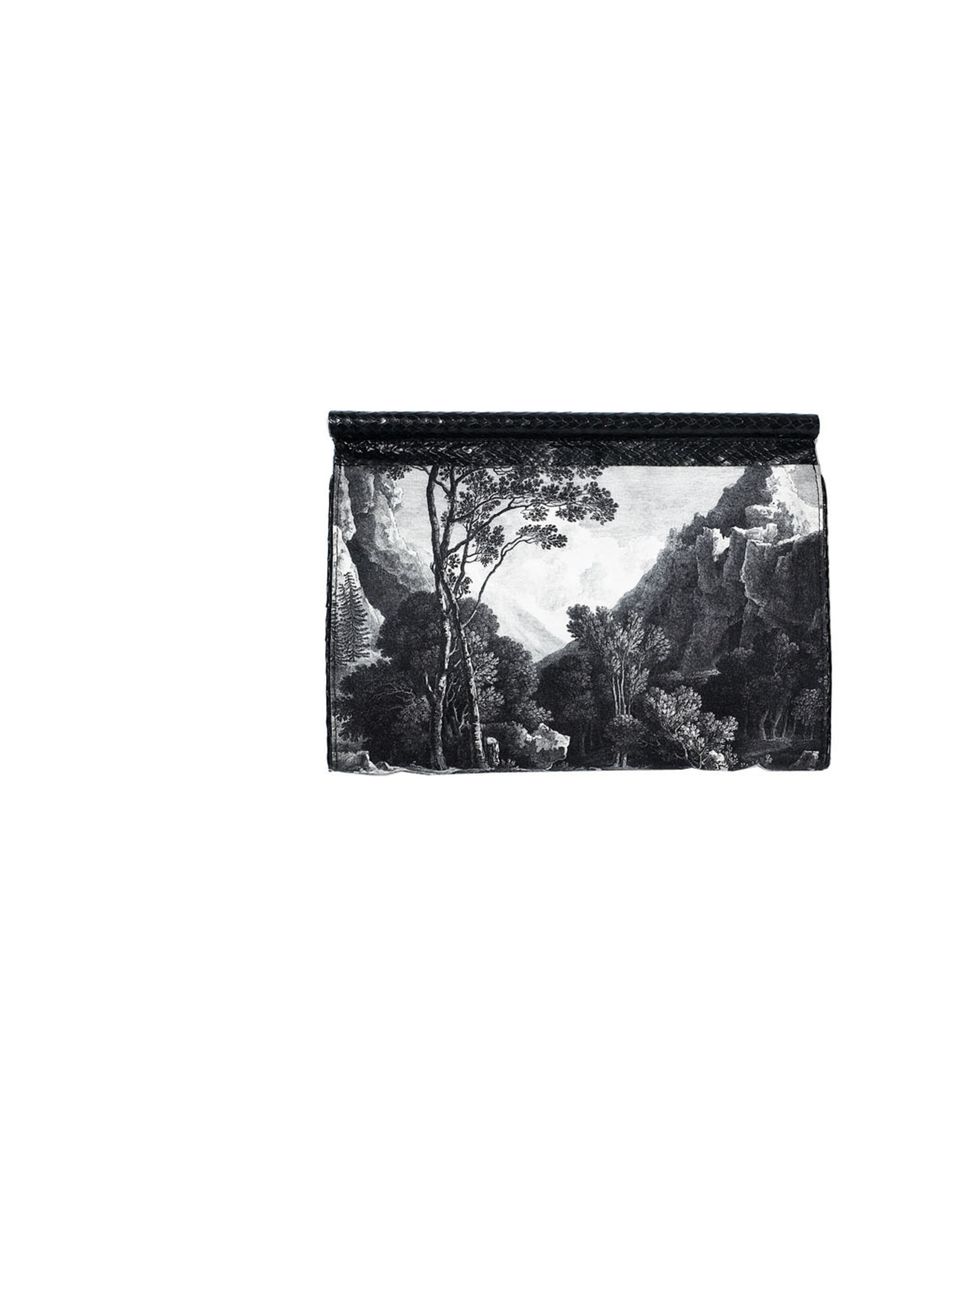 <p>Dries Van Noten monochrome printed clutch, £432, at Browns, for stockists 0207 514 0040</p>